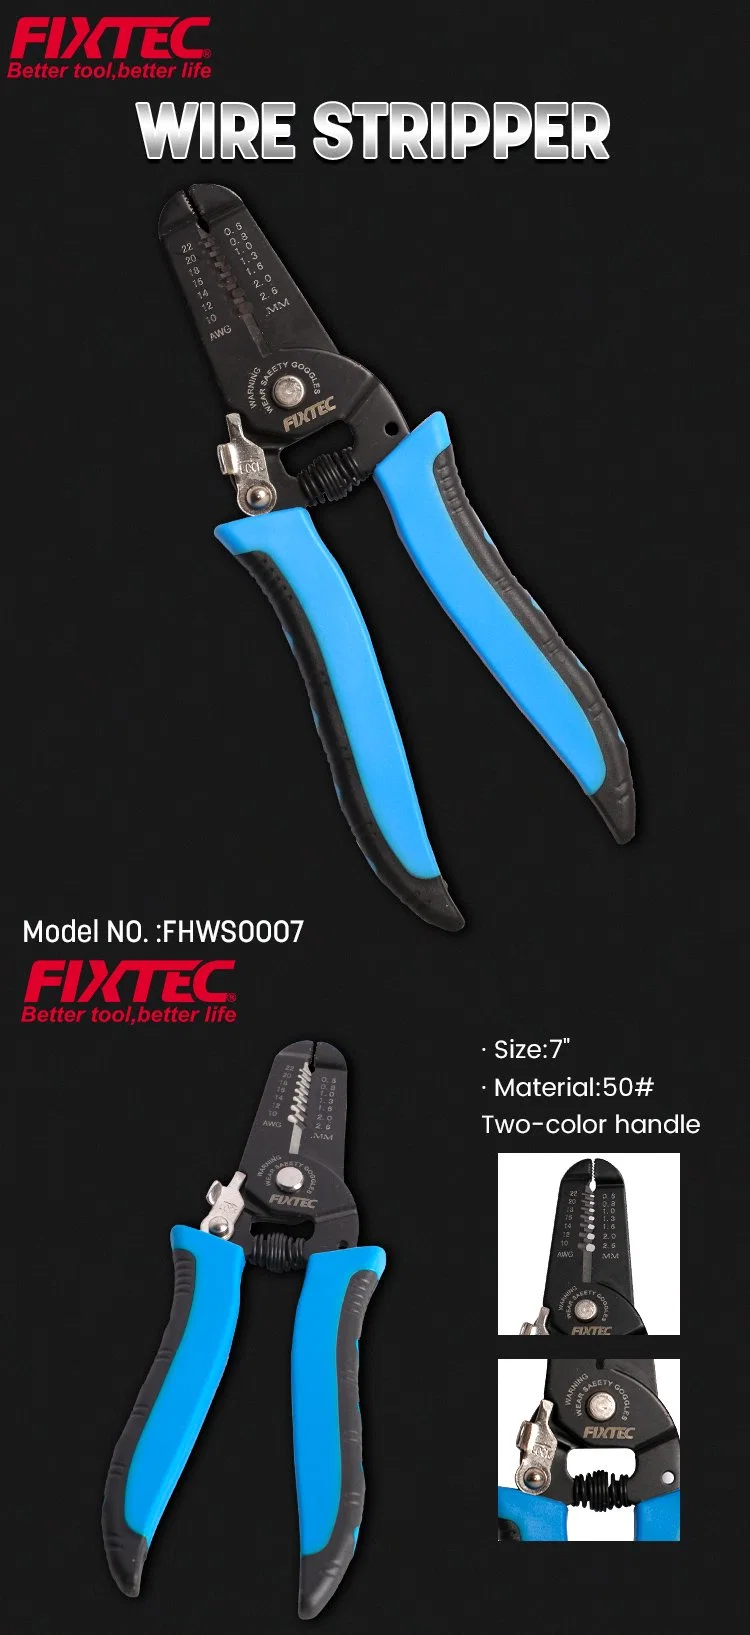 Fixtec Long Nose Crimping Tool Hand Tool 50# 7inch Crimper Wire Stripper Pliers